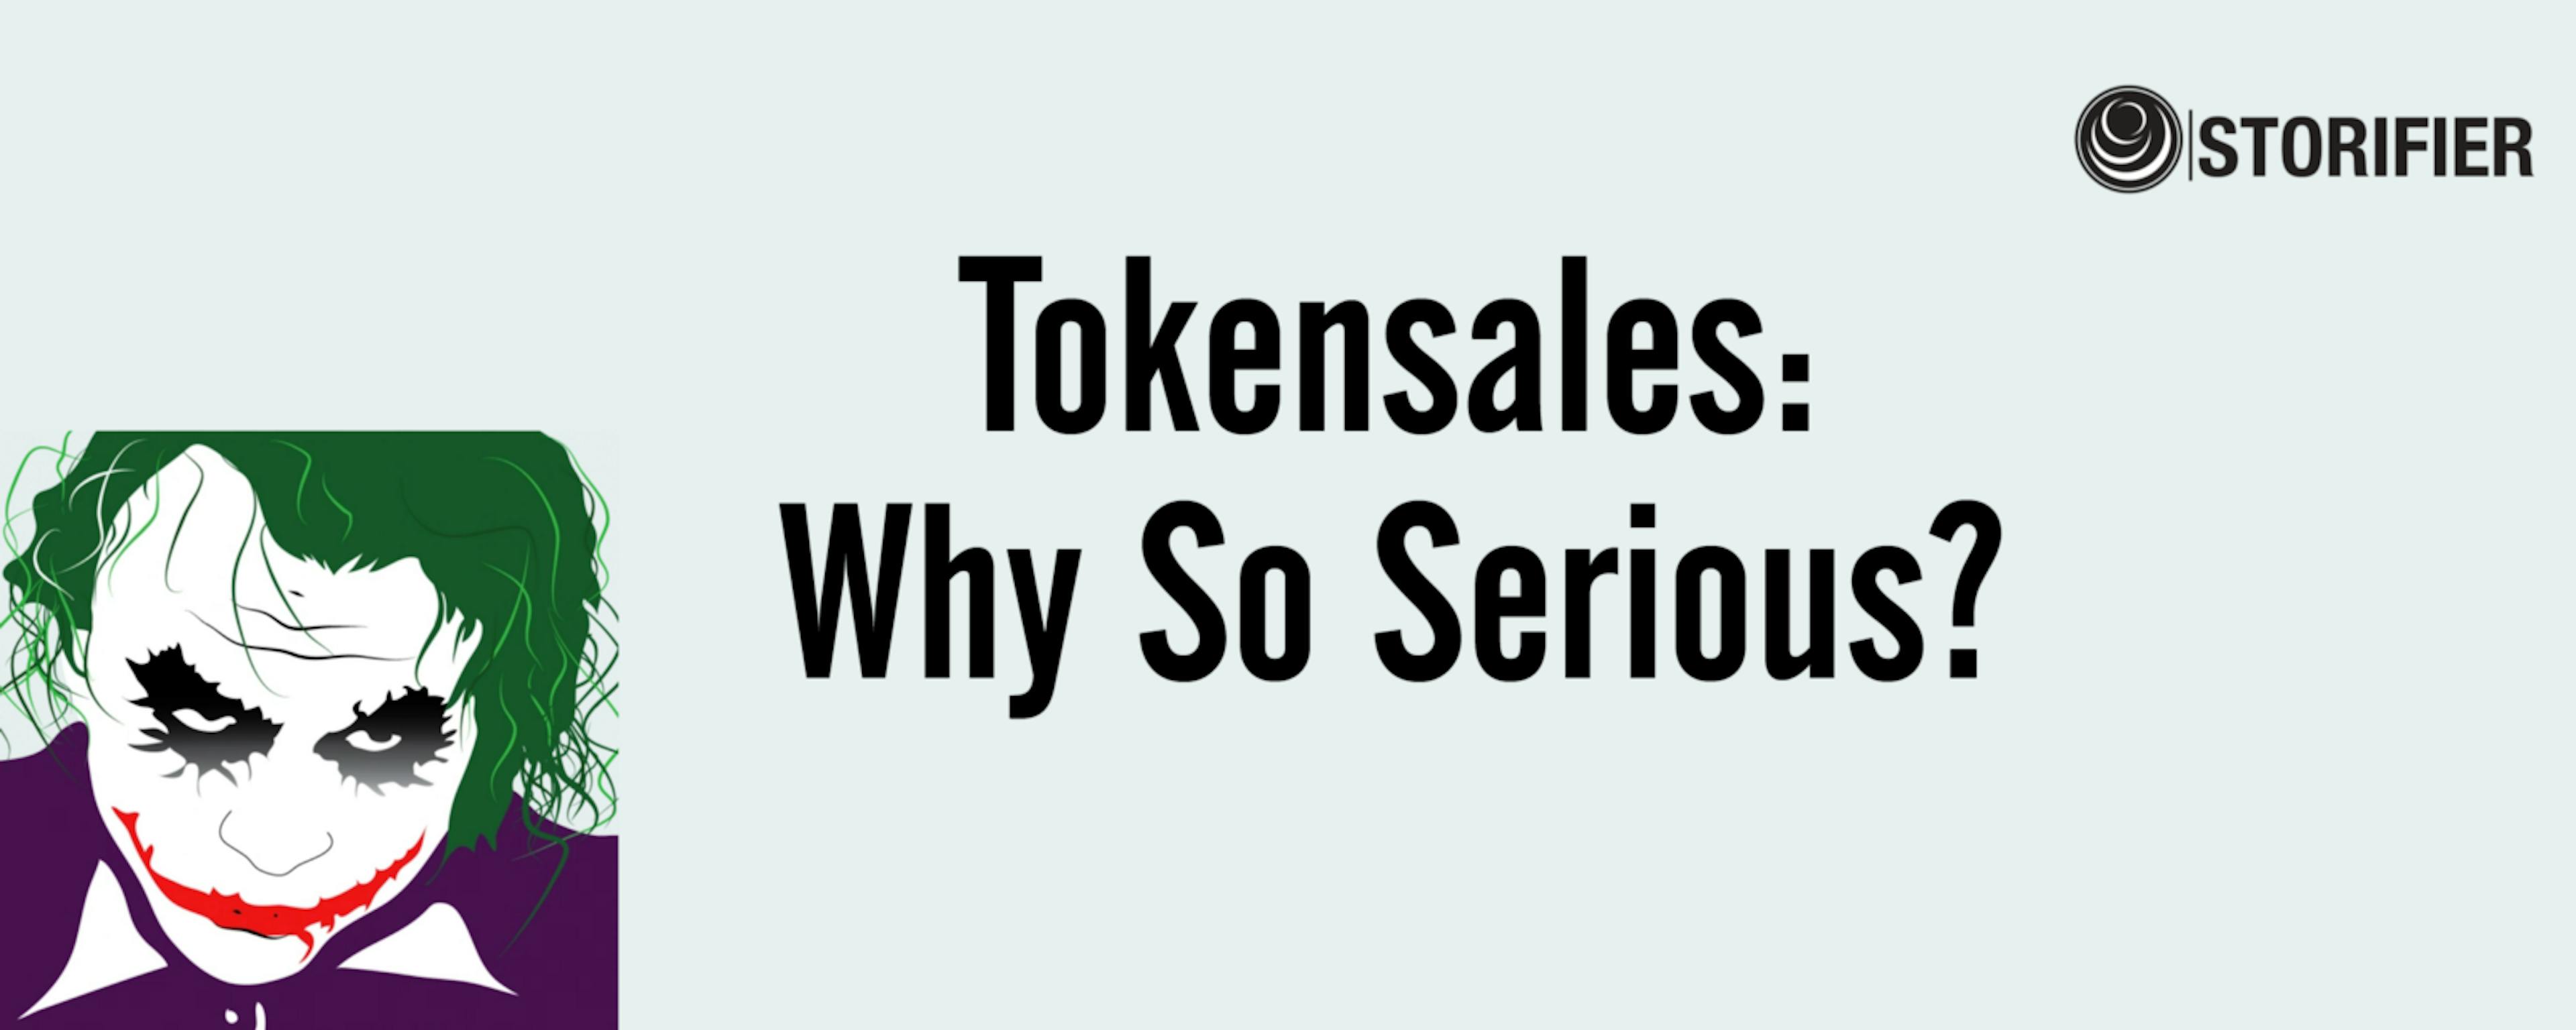 featured image - Not so serious look at tokensales